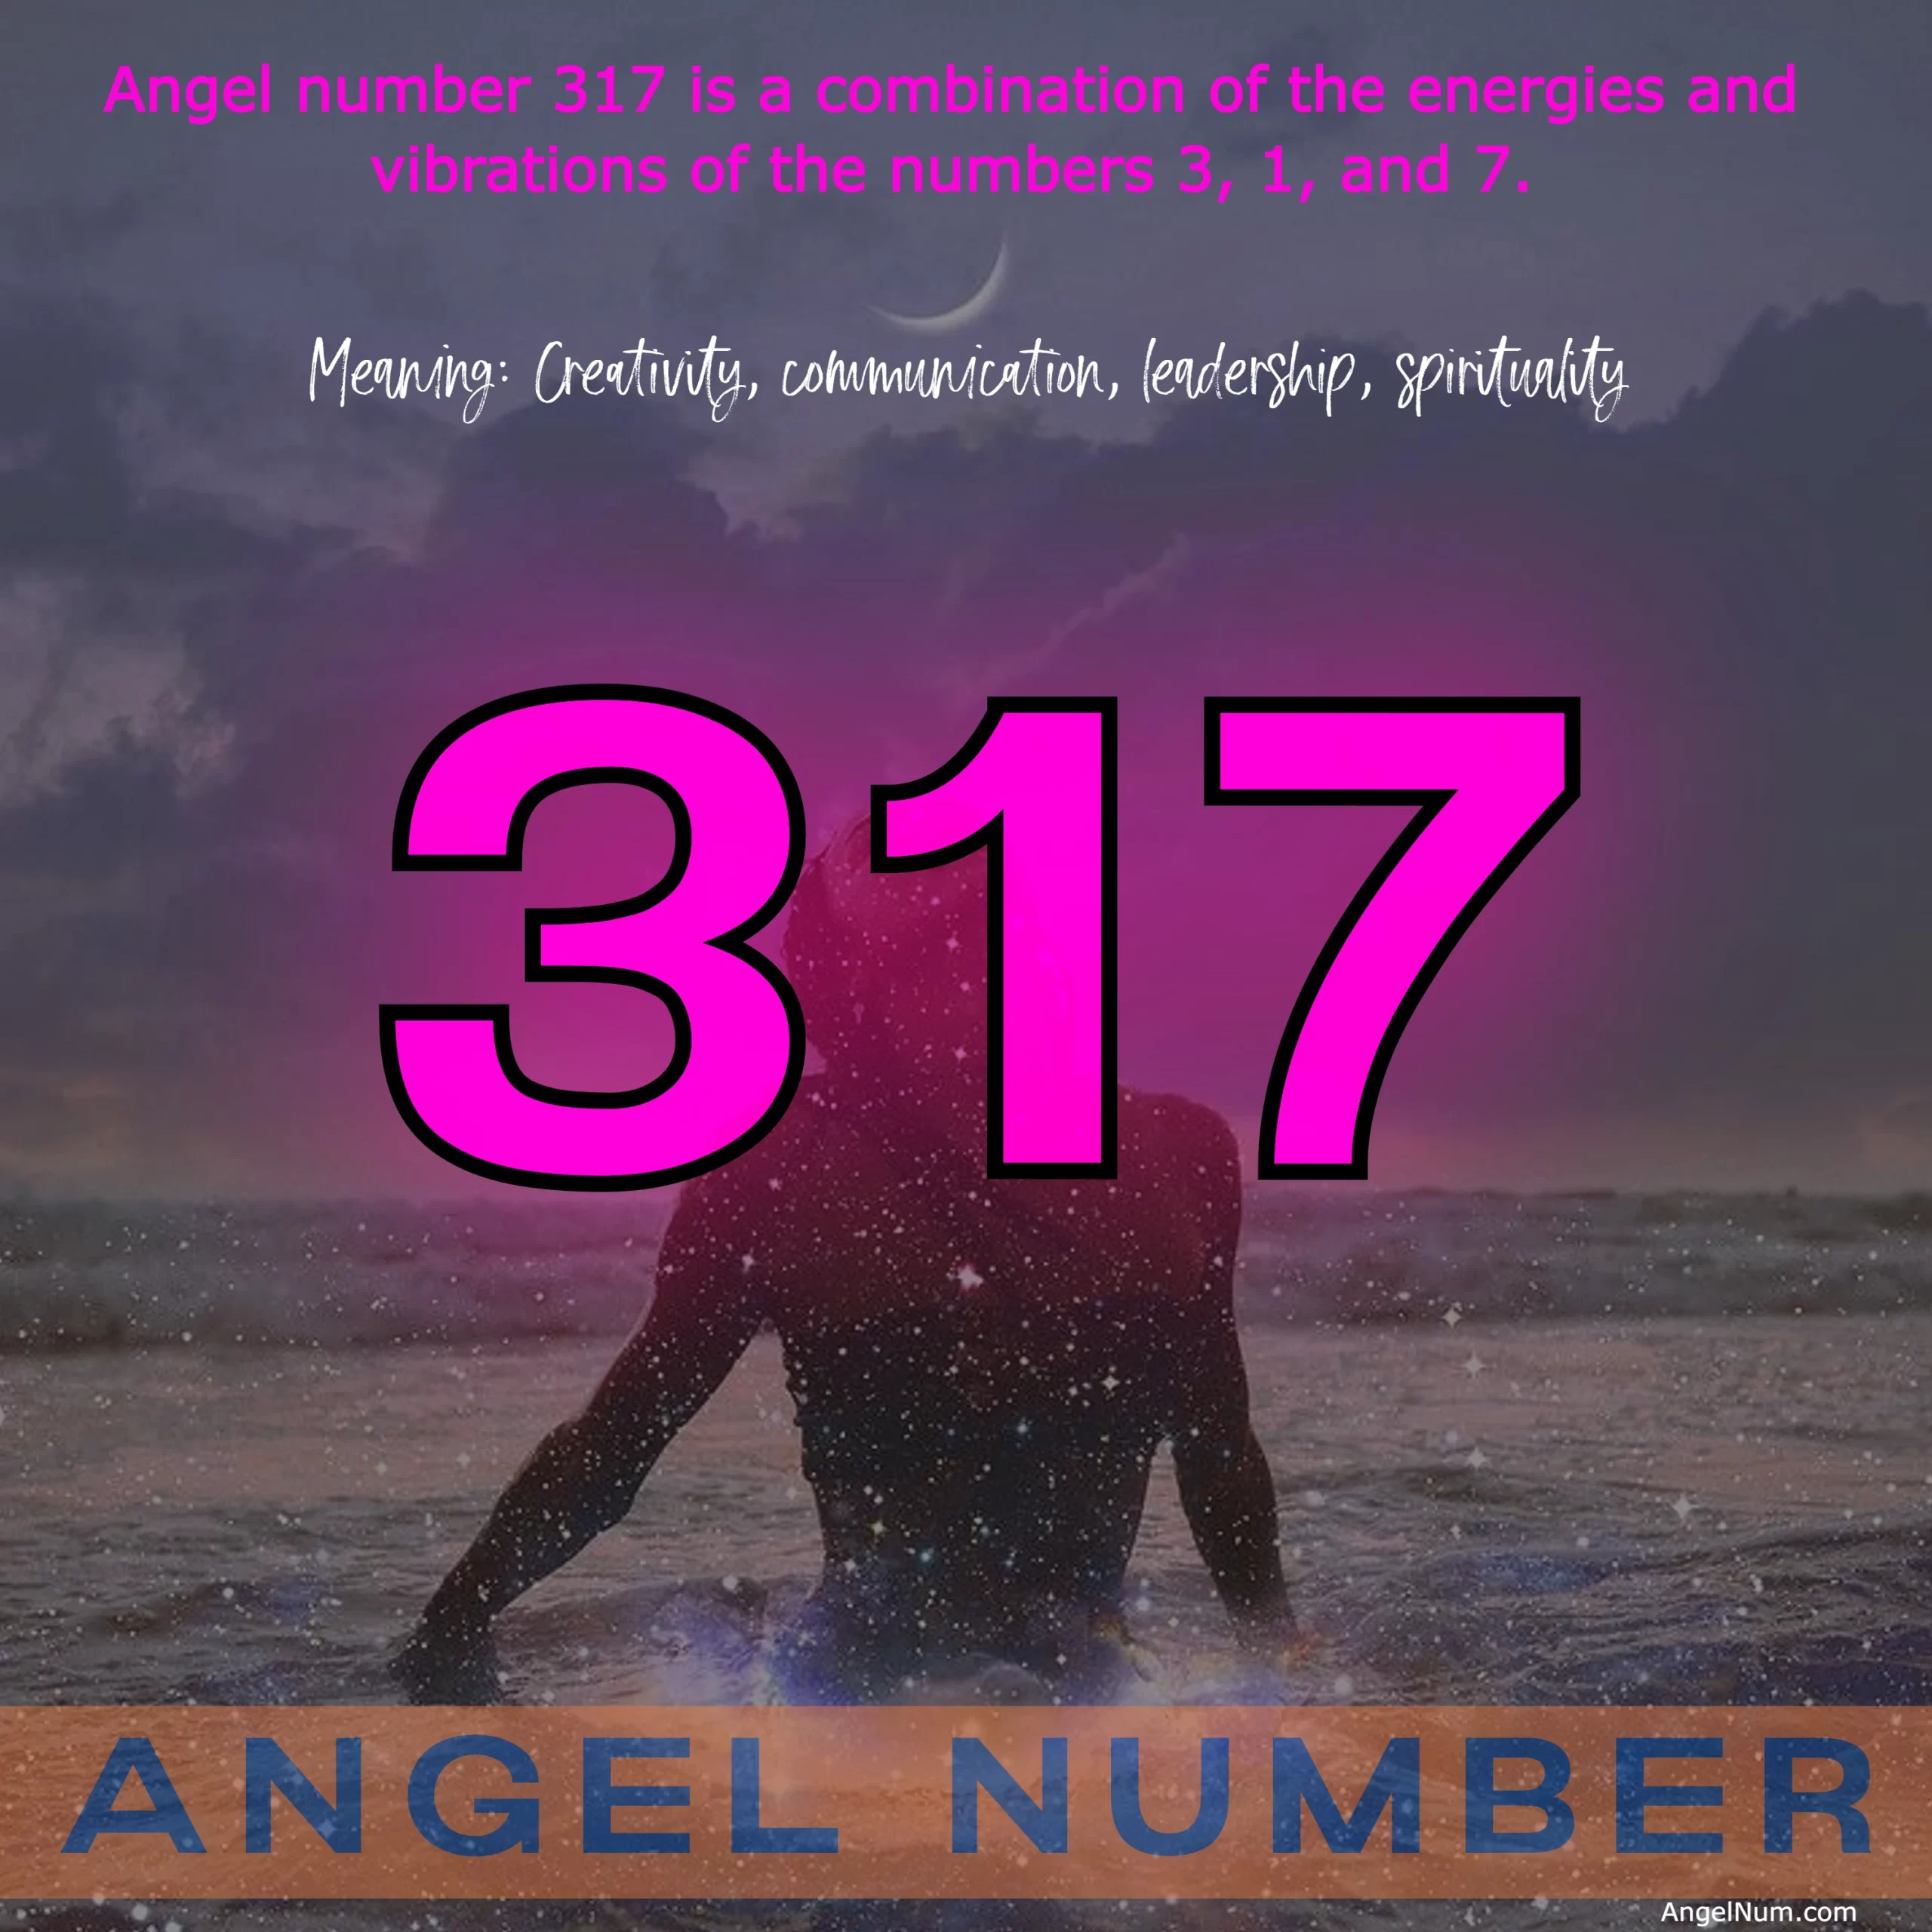 Decoding the Meaning of Angel Number 317: Creativity, Communication, and Leadership